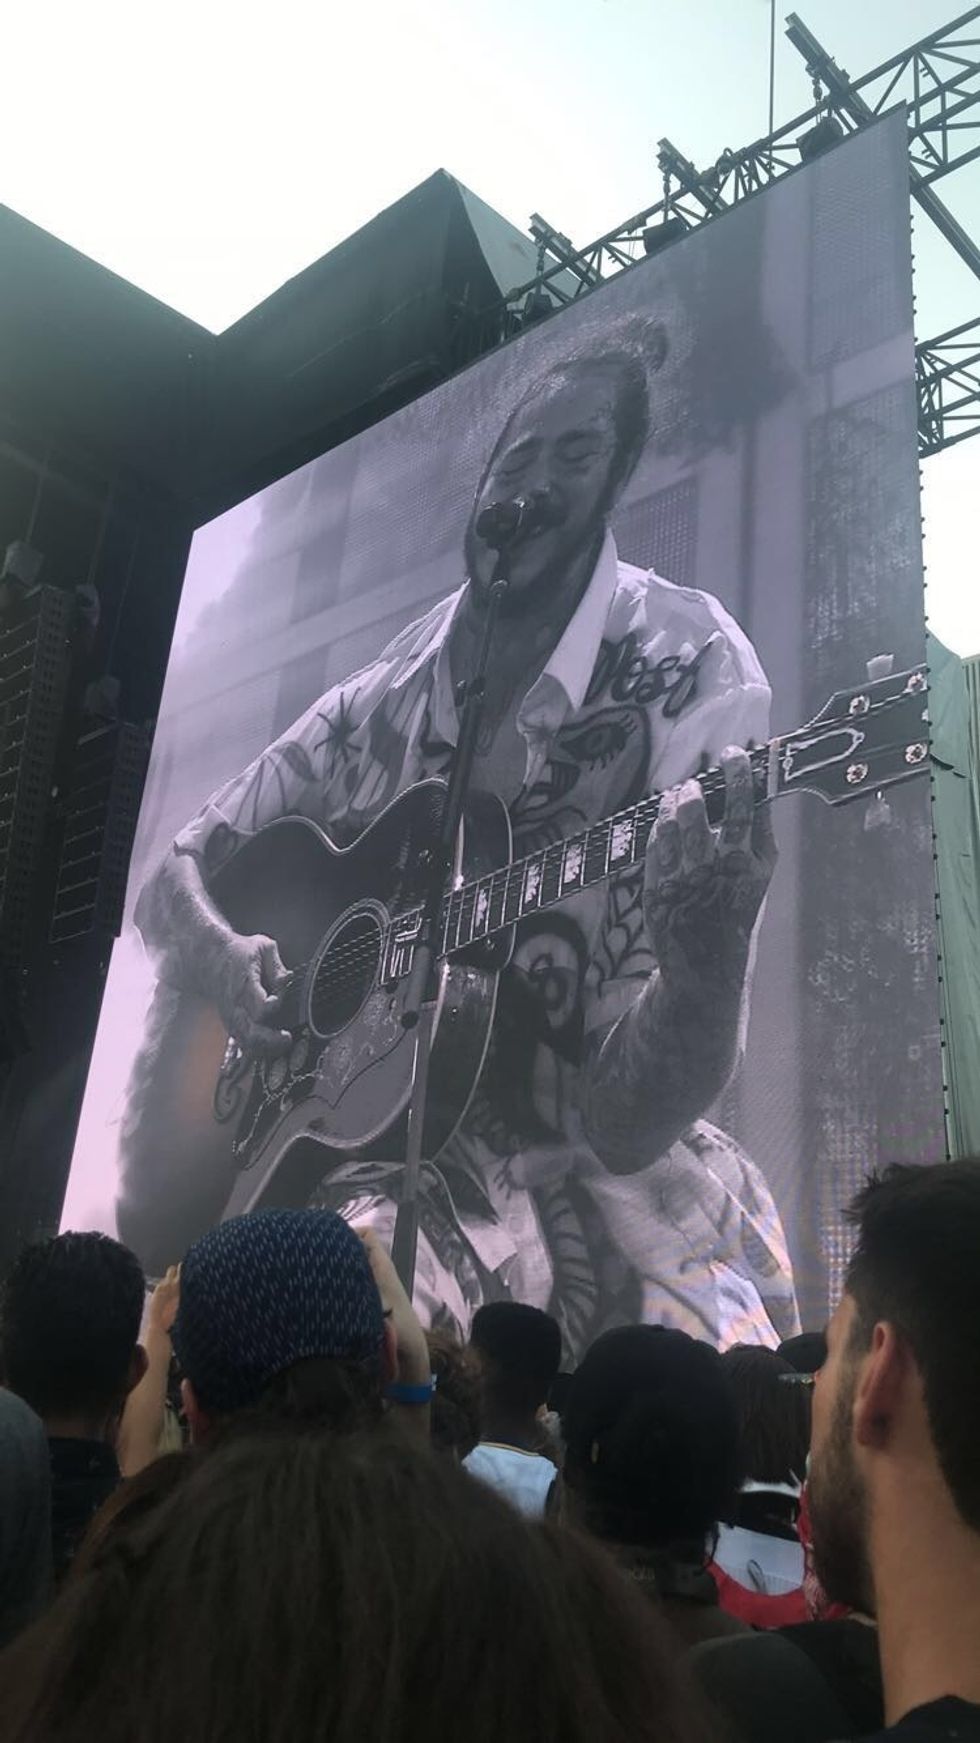 10 Reasons Why Post Malone Is Not Just A Talented Artist, But Also A Lovable Person